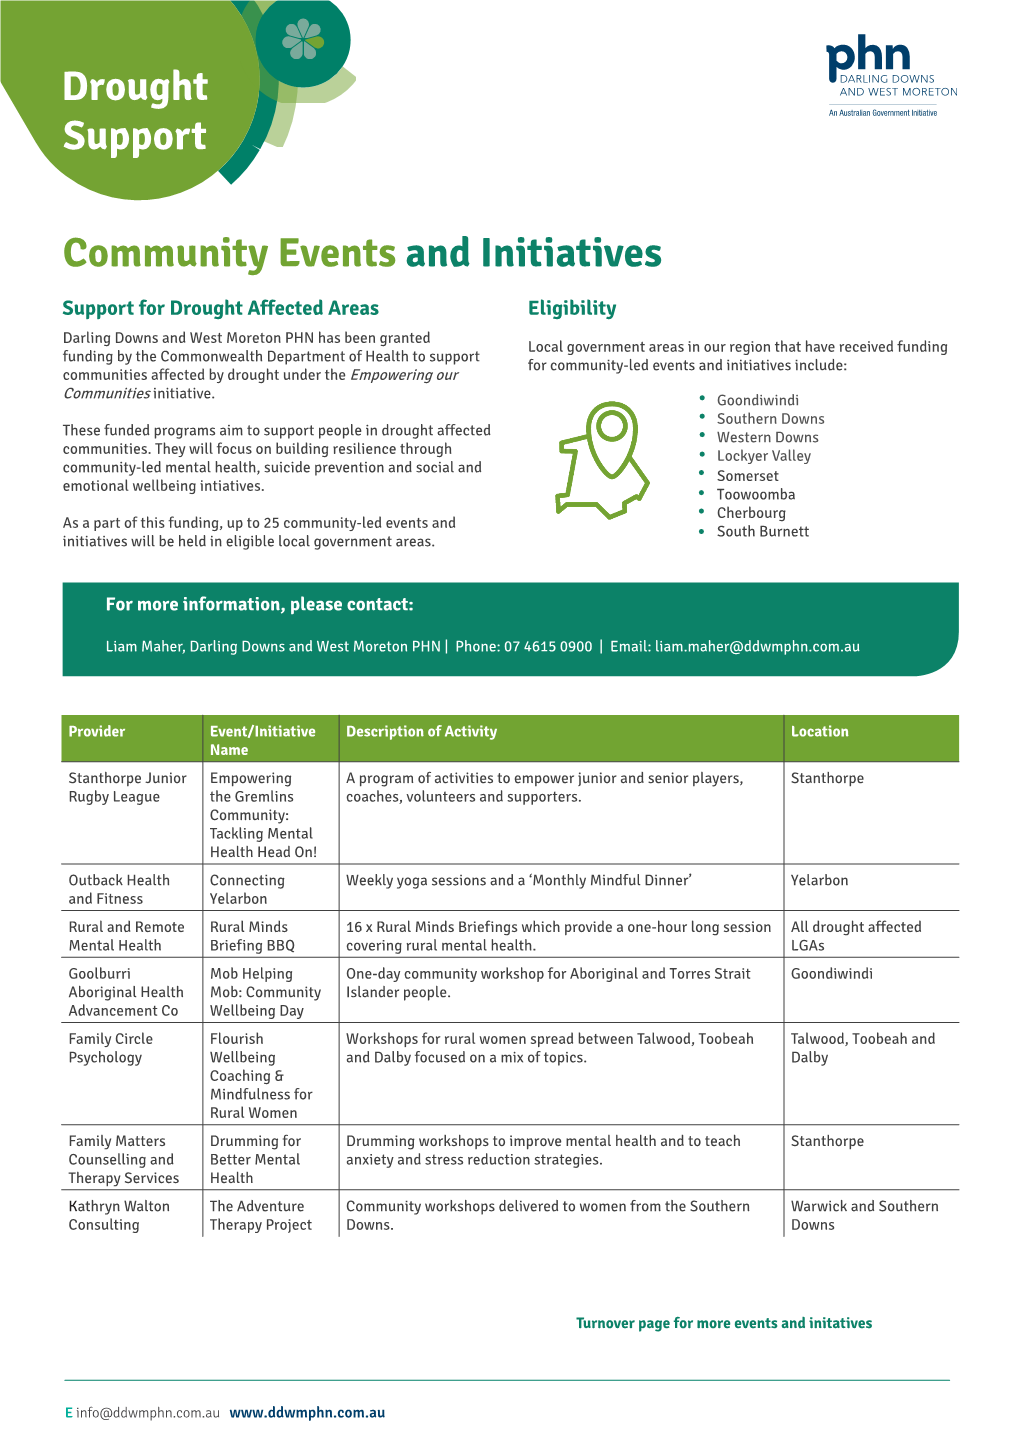 Drought Support Community Events and Initiatives